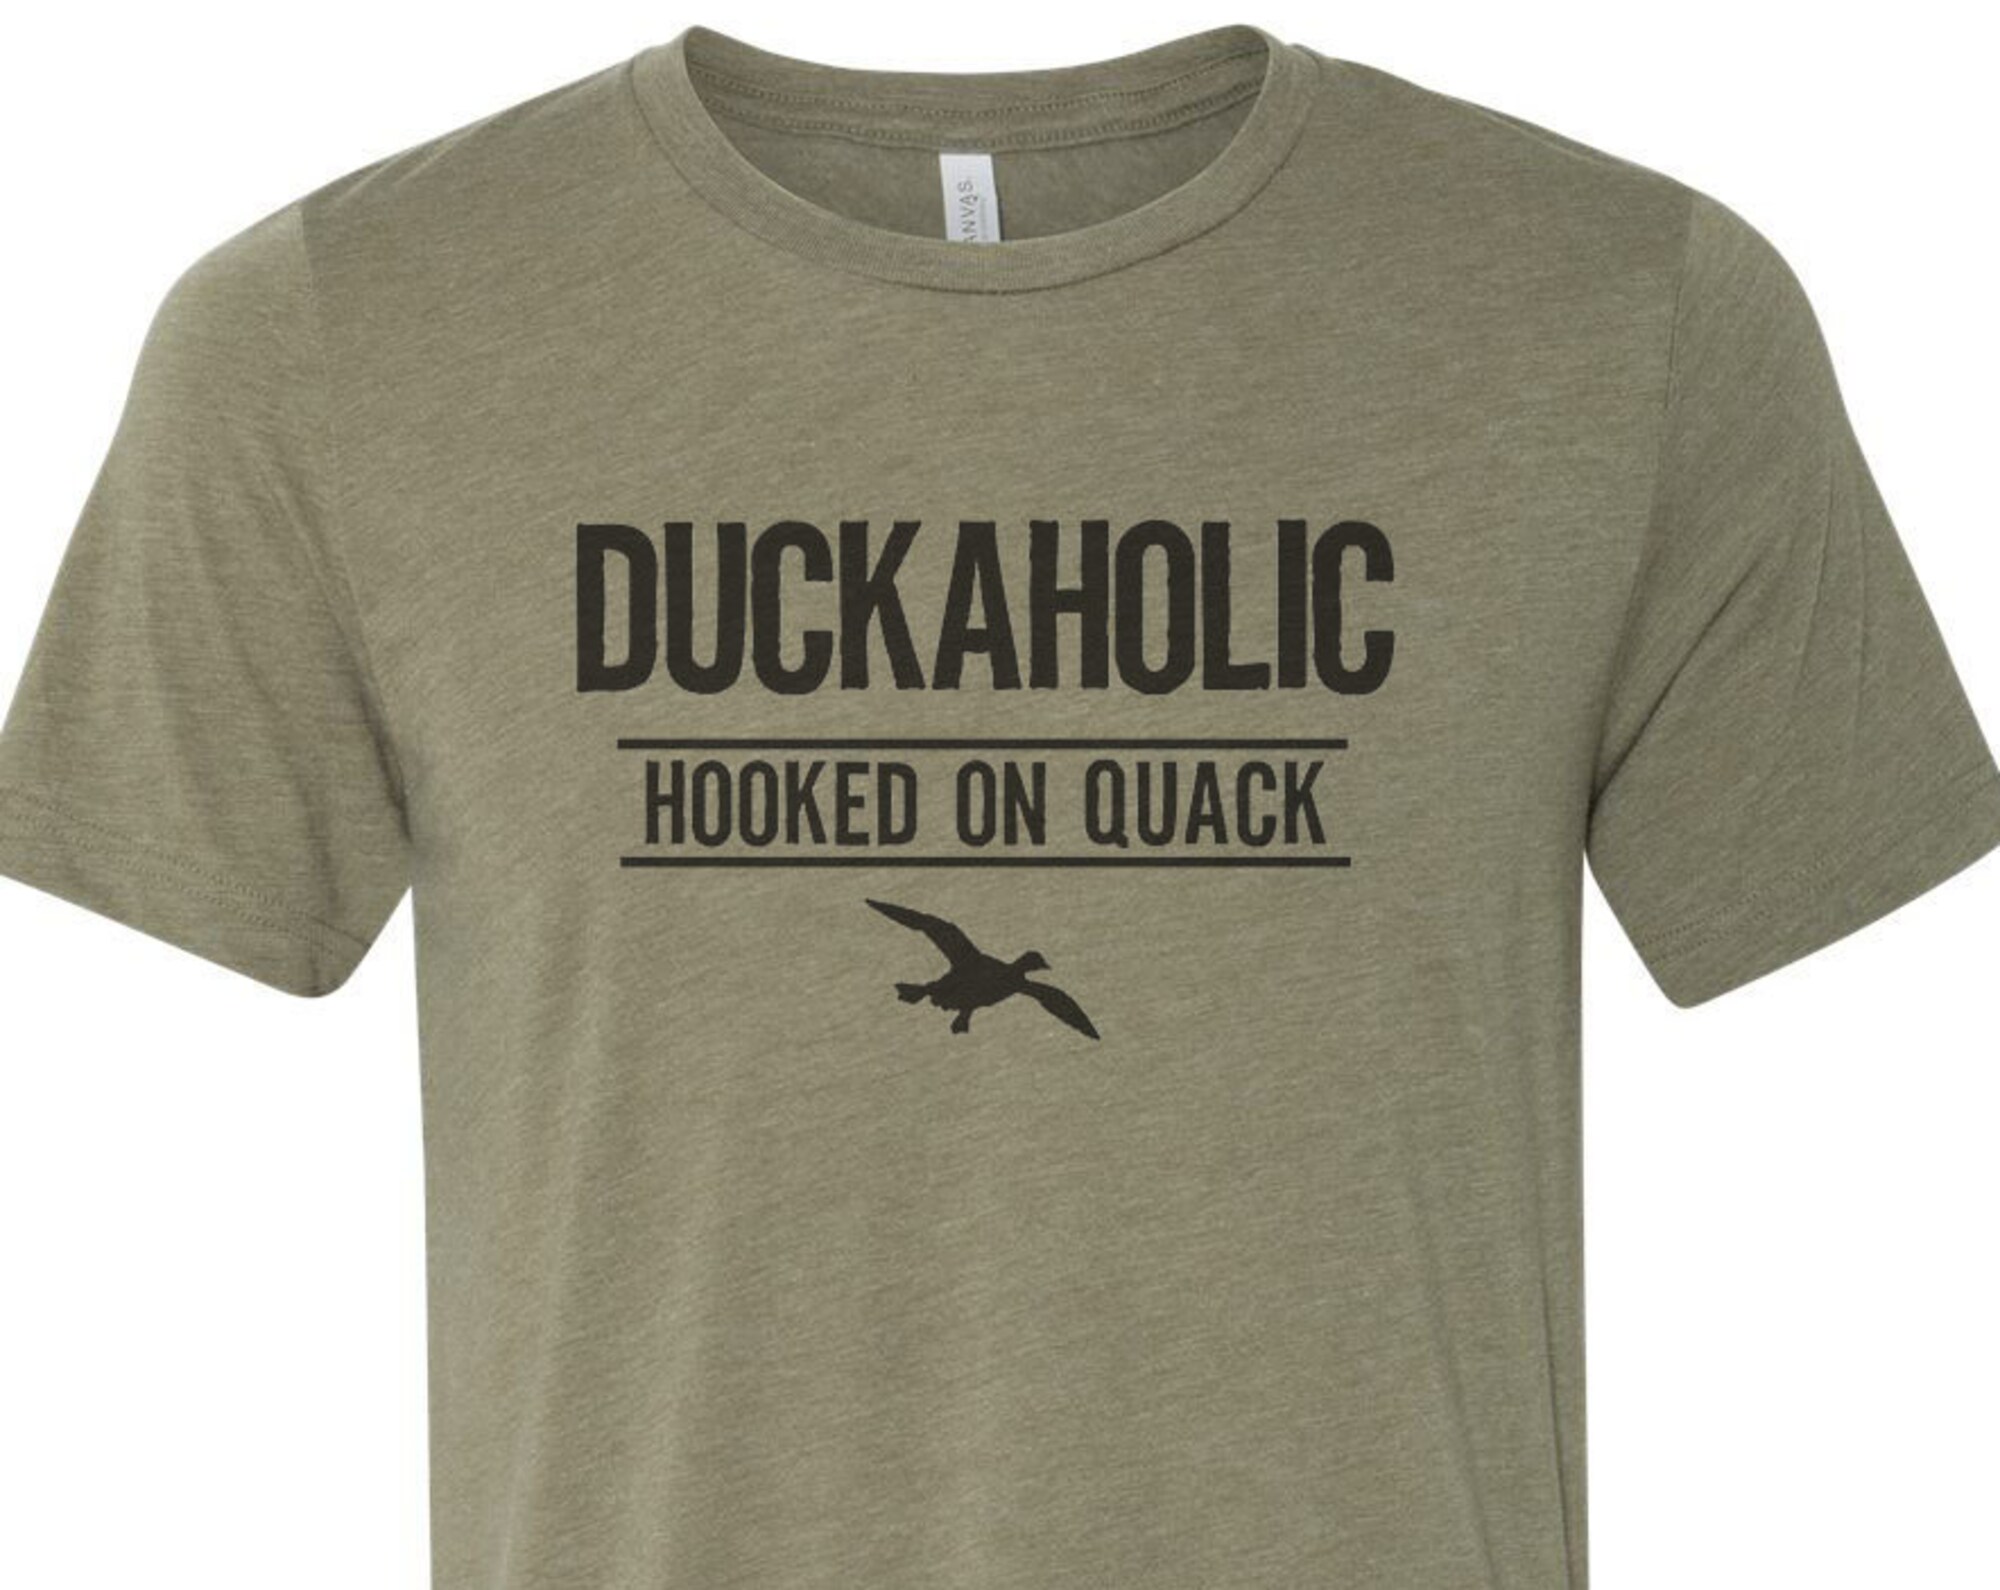 Discover Duck Hunting Shirt, Duckaholic, Duck Hunting Apparel, Men's Hunting T, Duck Hunting T-Shirt